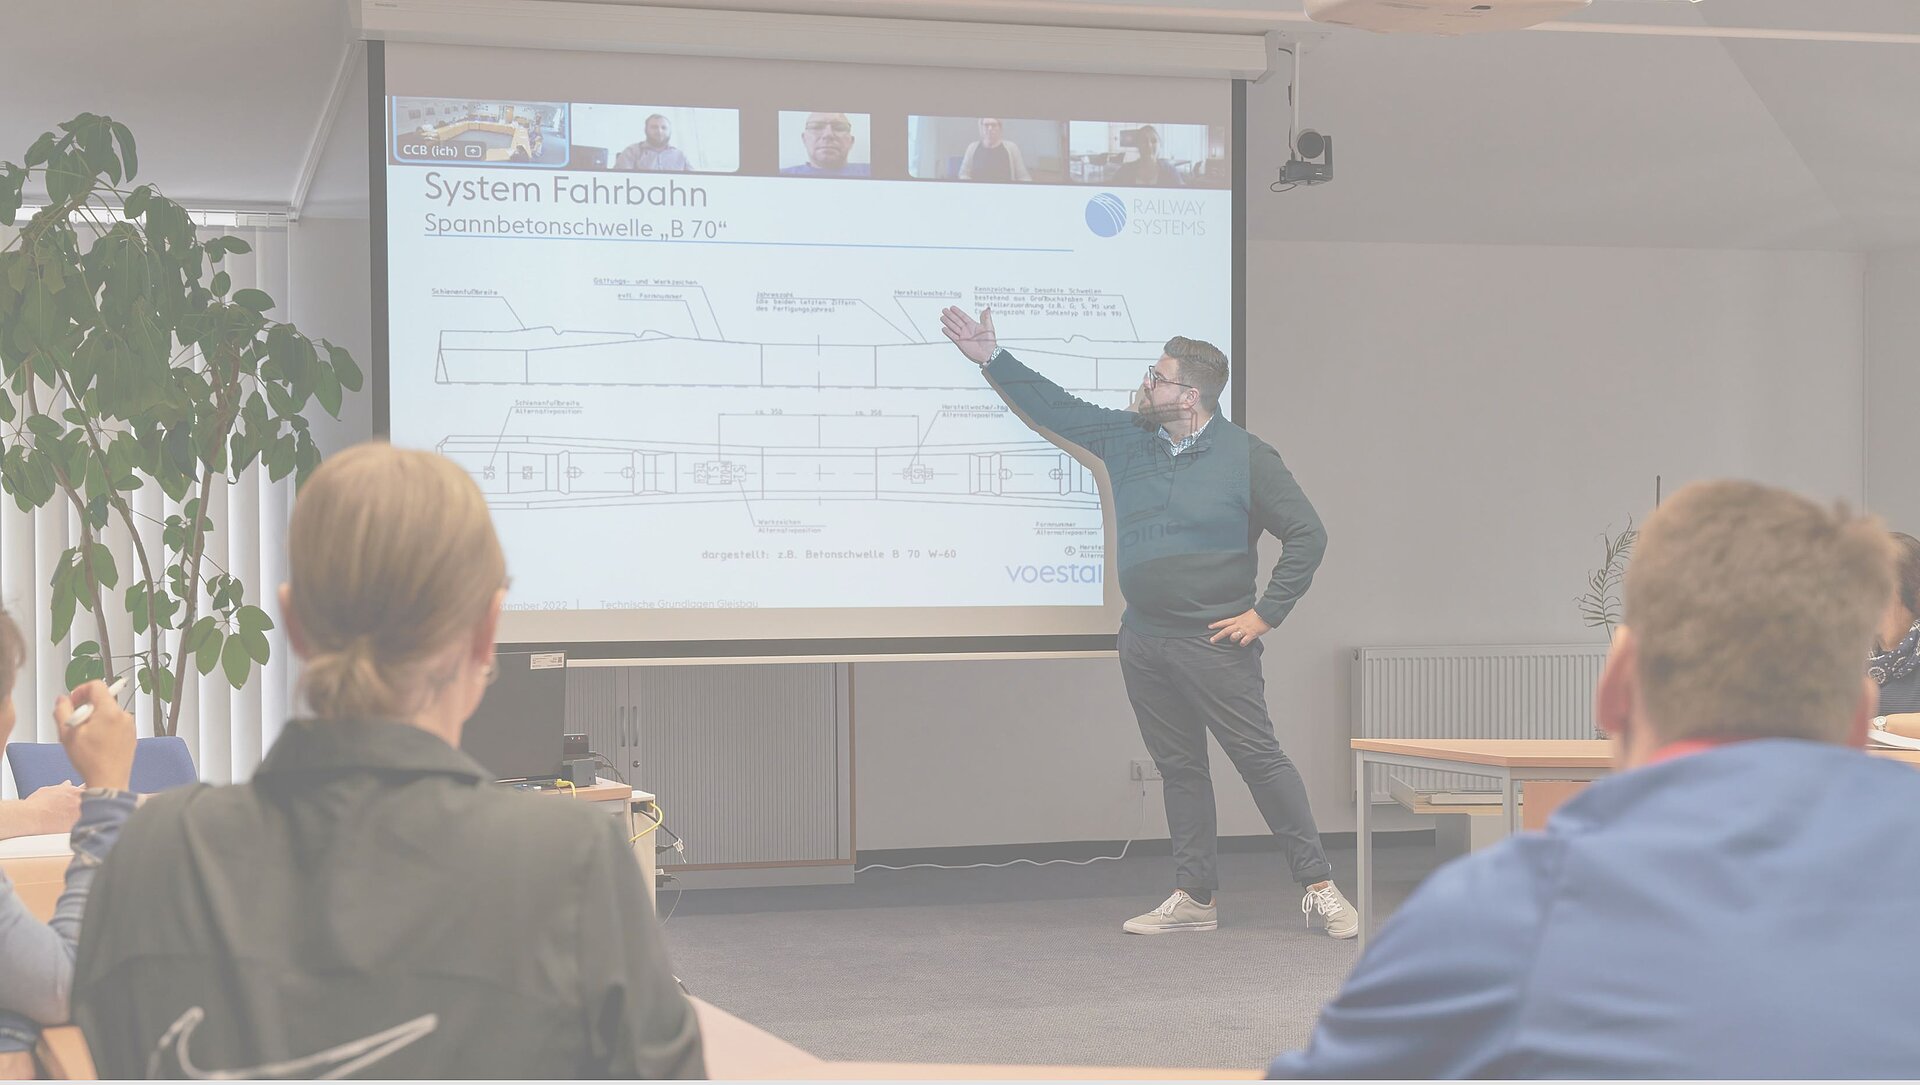 The Railway Systems Academy at the Campus Brandenburg has been a top destination for training in the railway industry for 20 years.